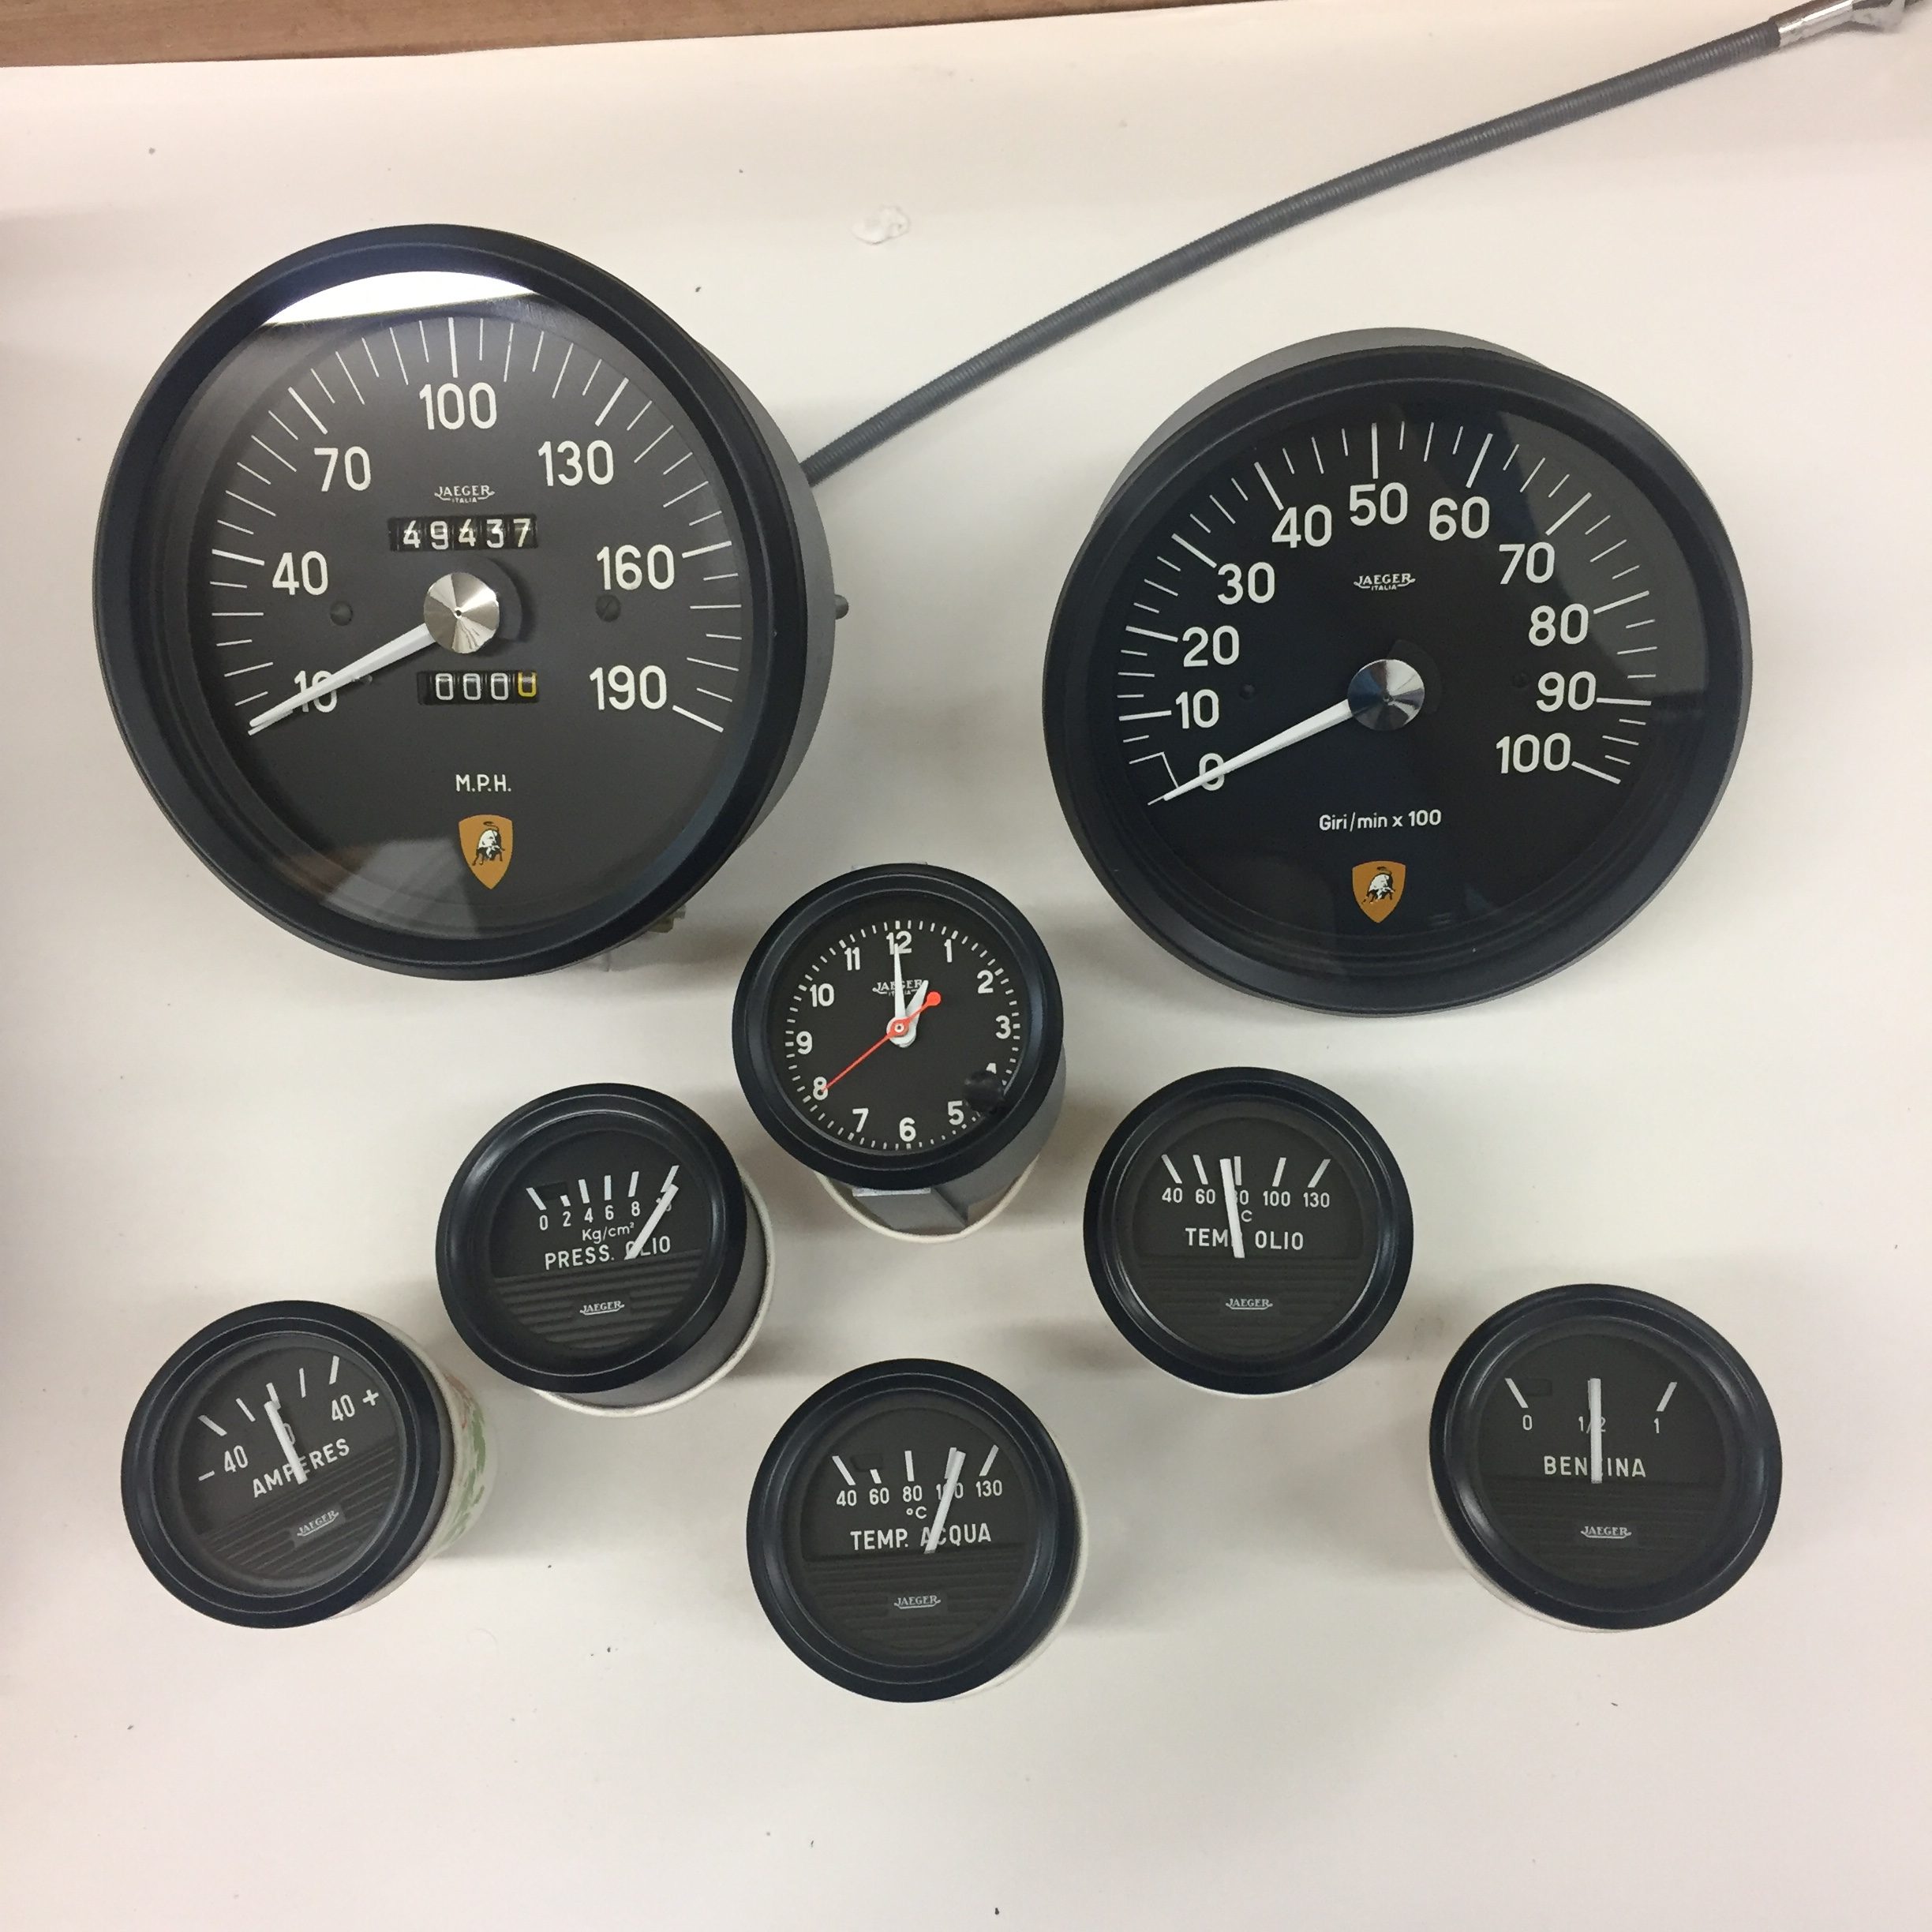 Black classic speedometers and devices